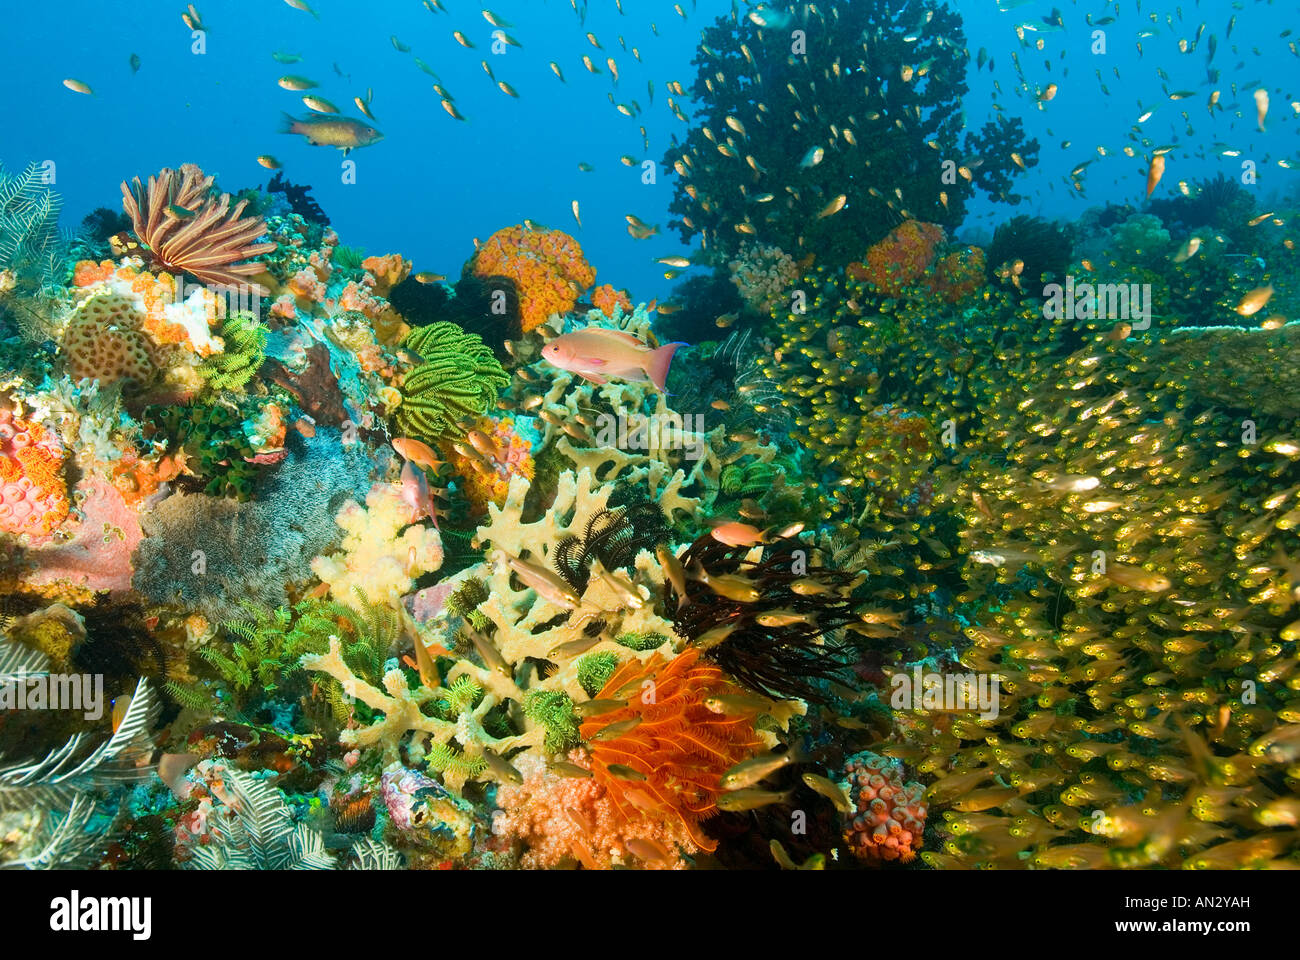 Reef scenic with amazing diversity of corals invertebrates and fishes Komodo National Park Indonesia Stock Photo